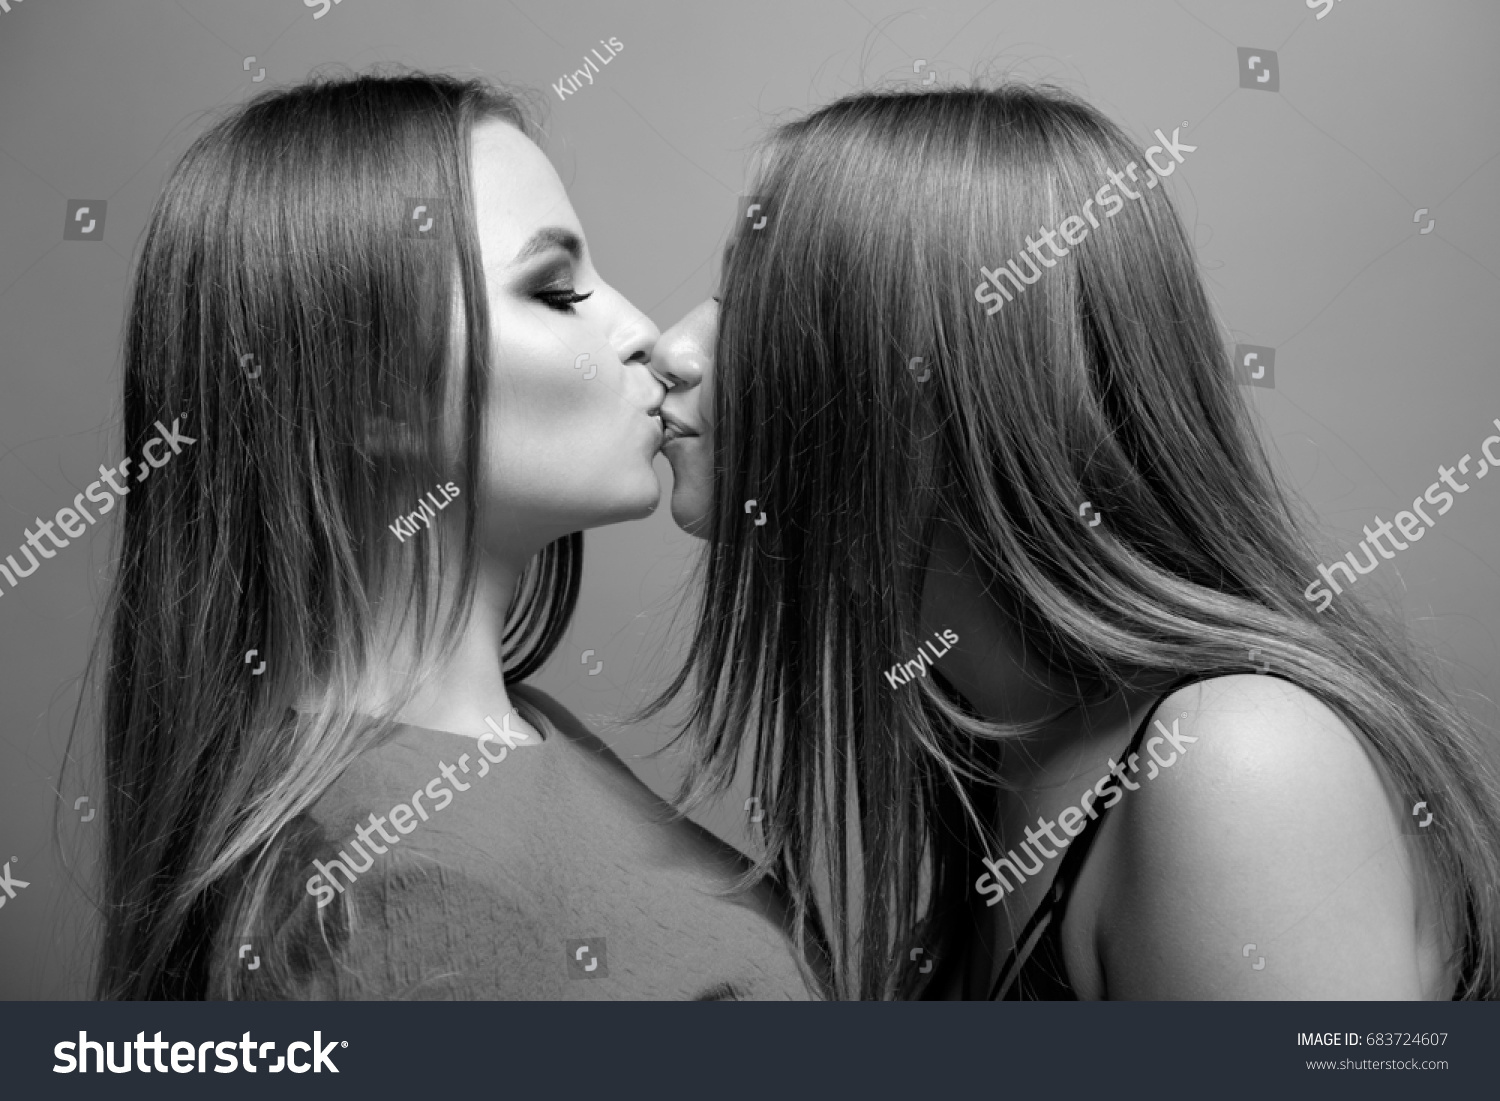 Girls Kissing Each Other